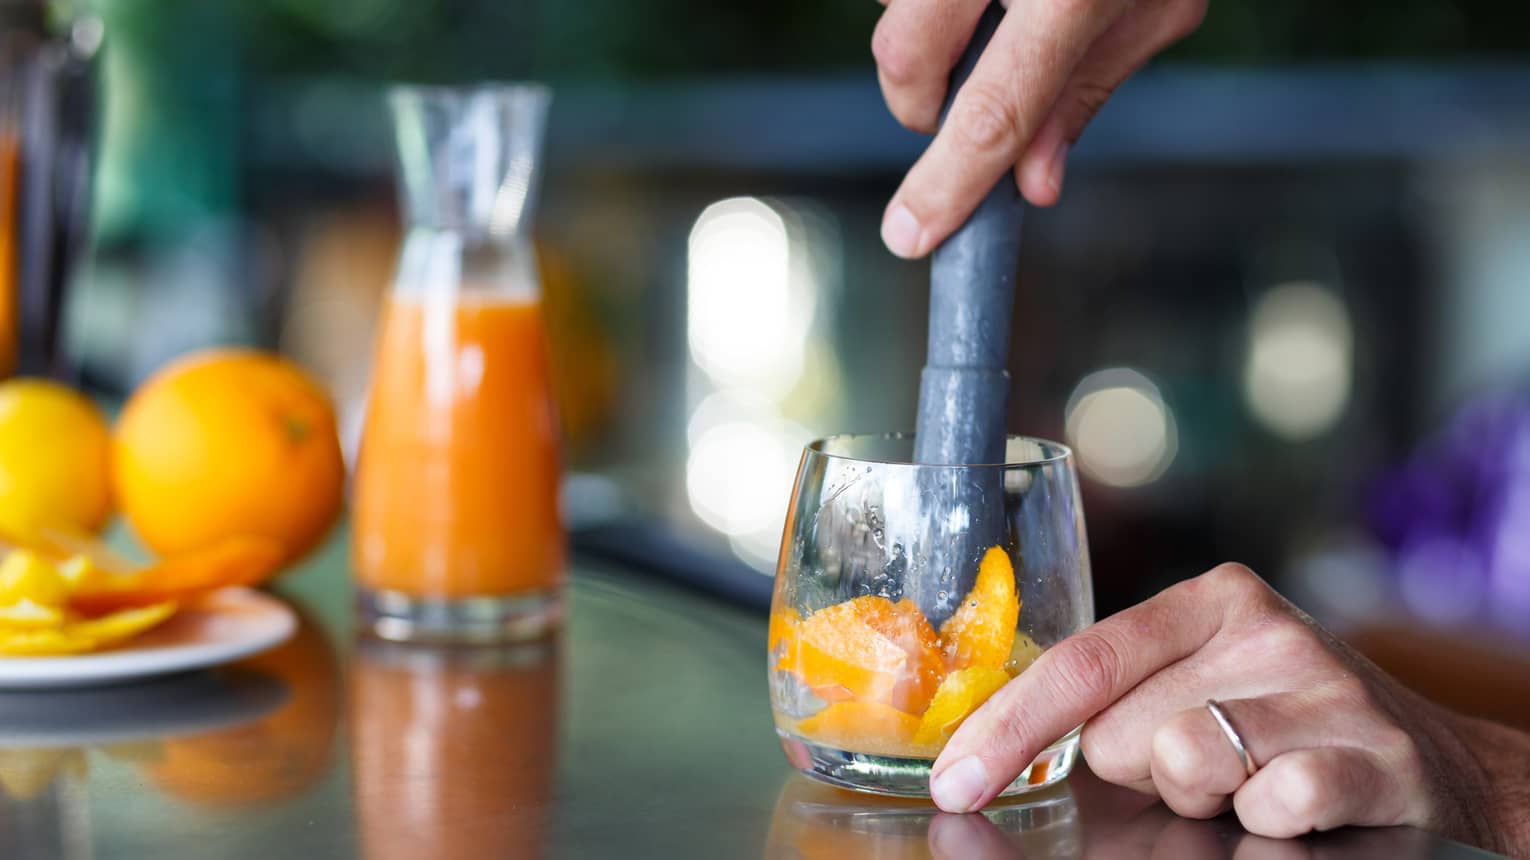 One hand steadies a clear glass while the other muddles orange slices; in the background, whole oranges, peels and a carafe.